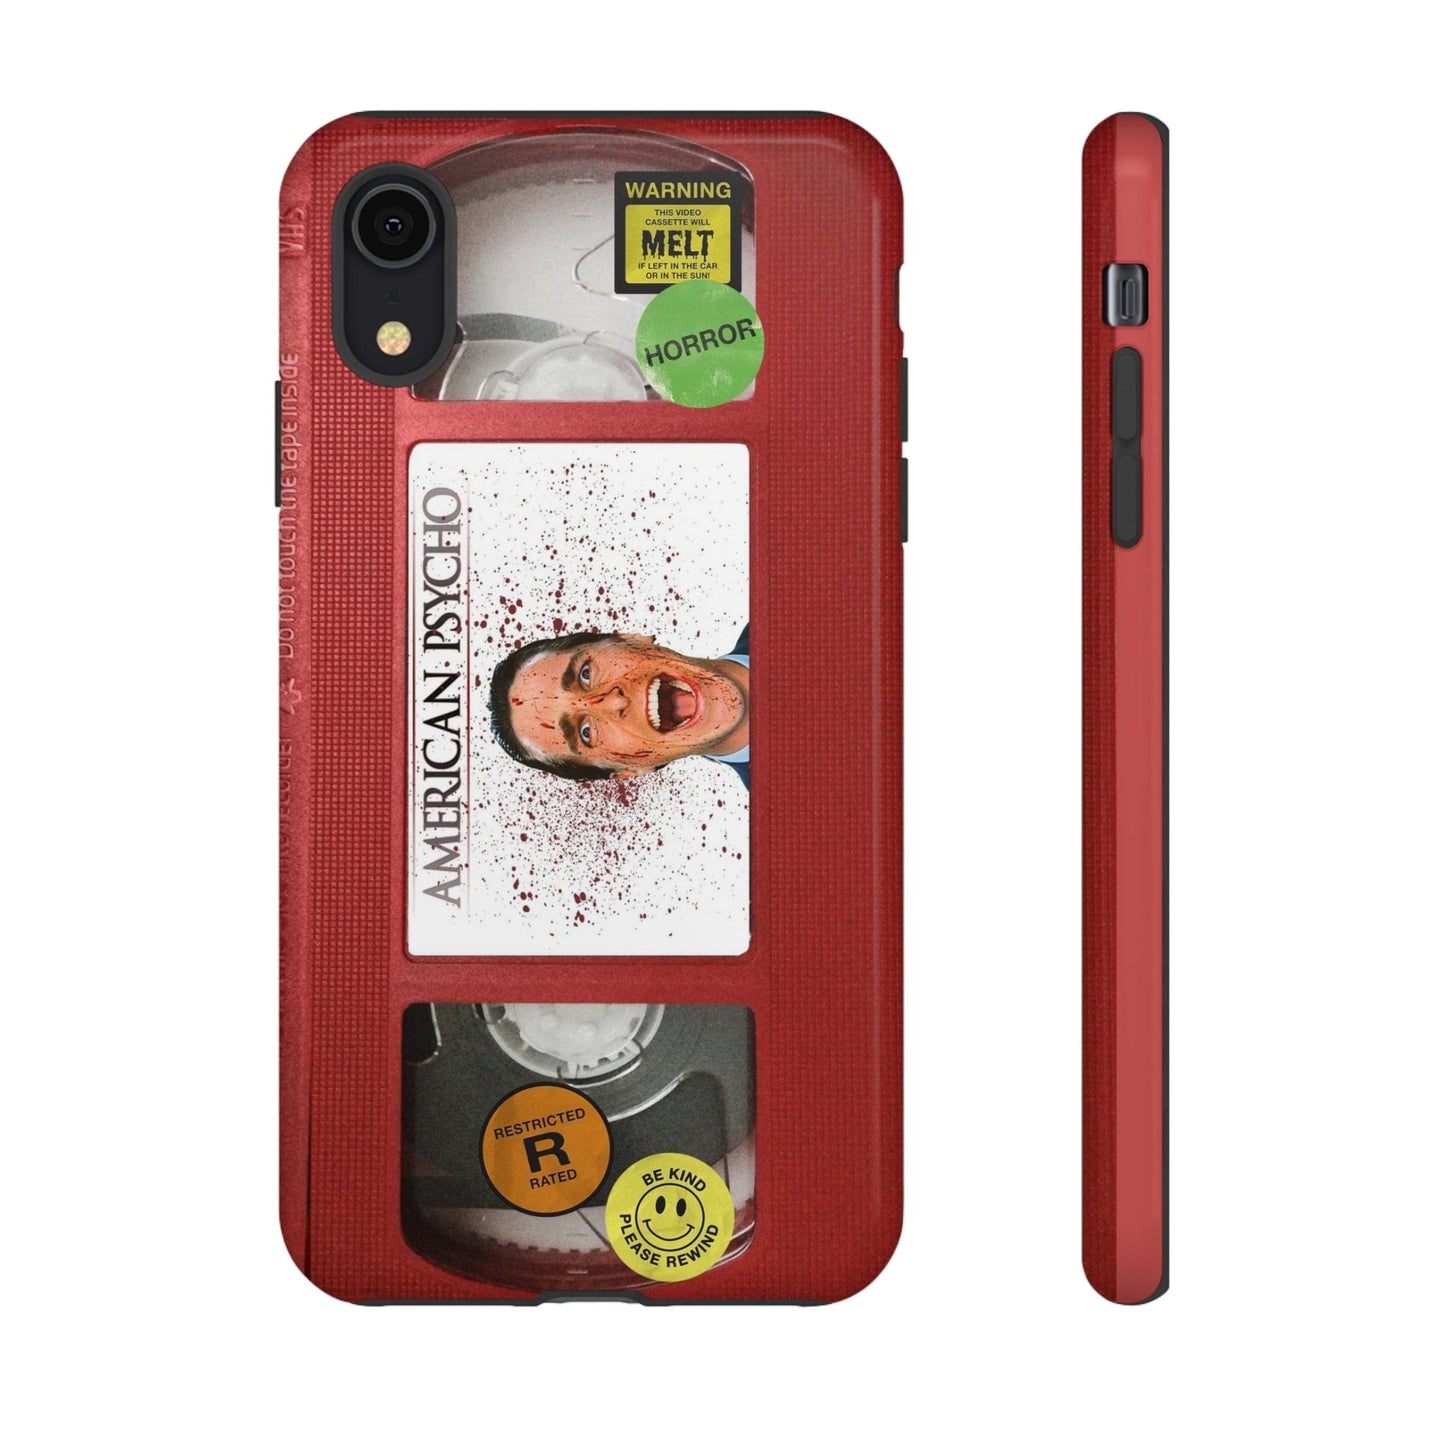 🇺🇸 Psycho Red Edition VHS Phone Case